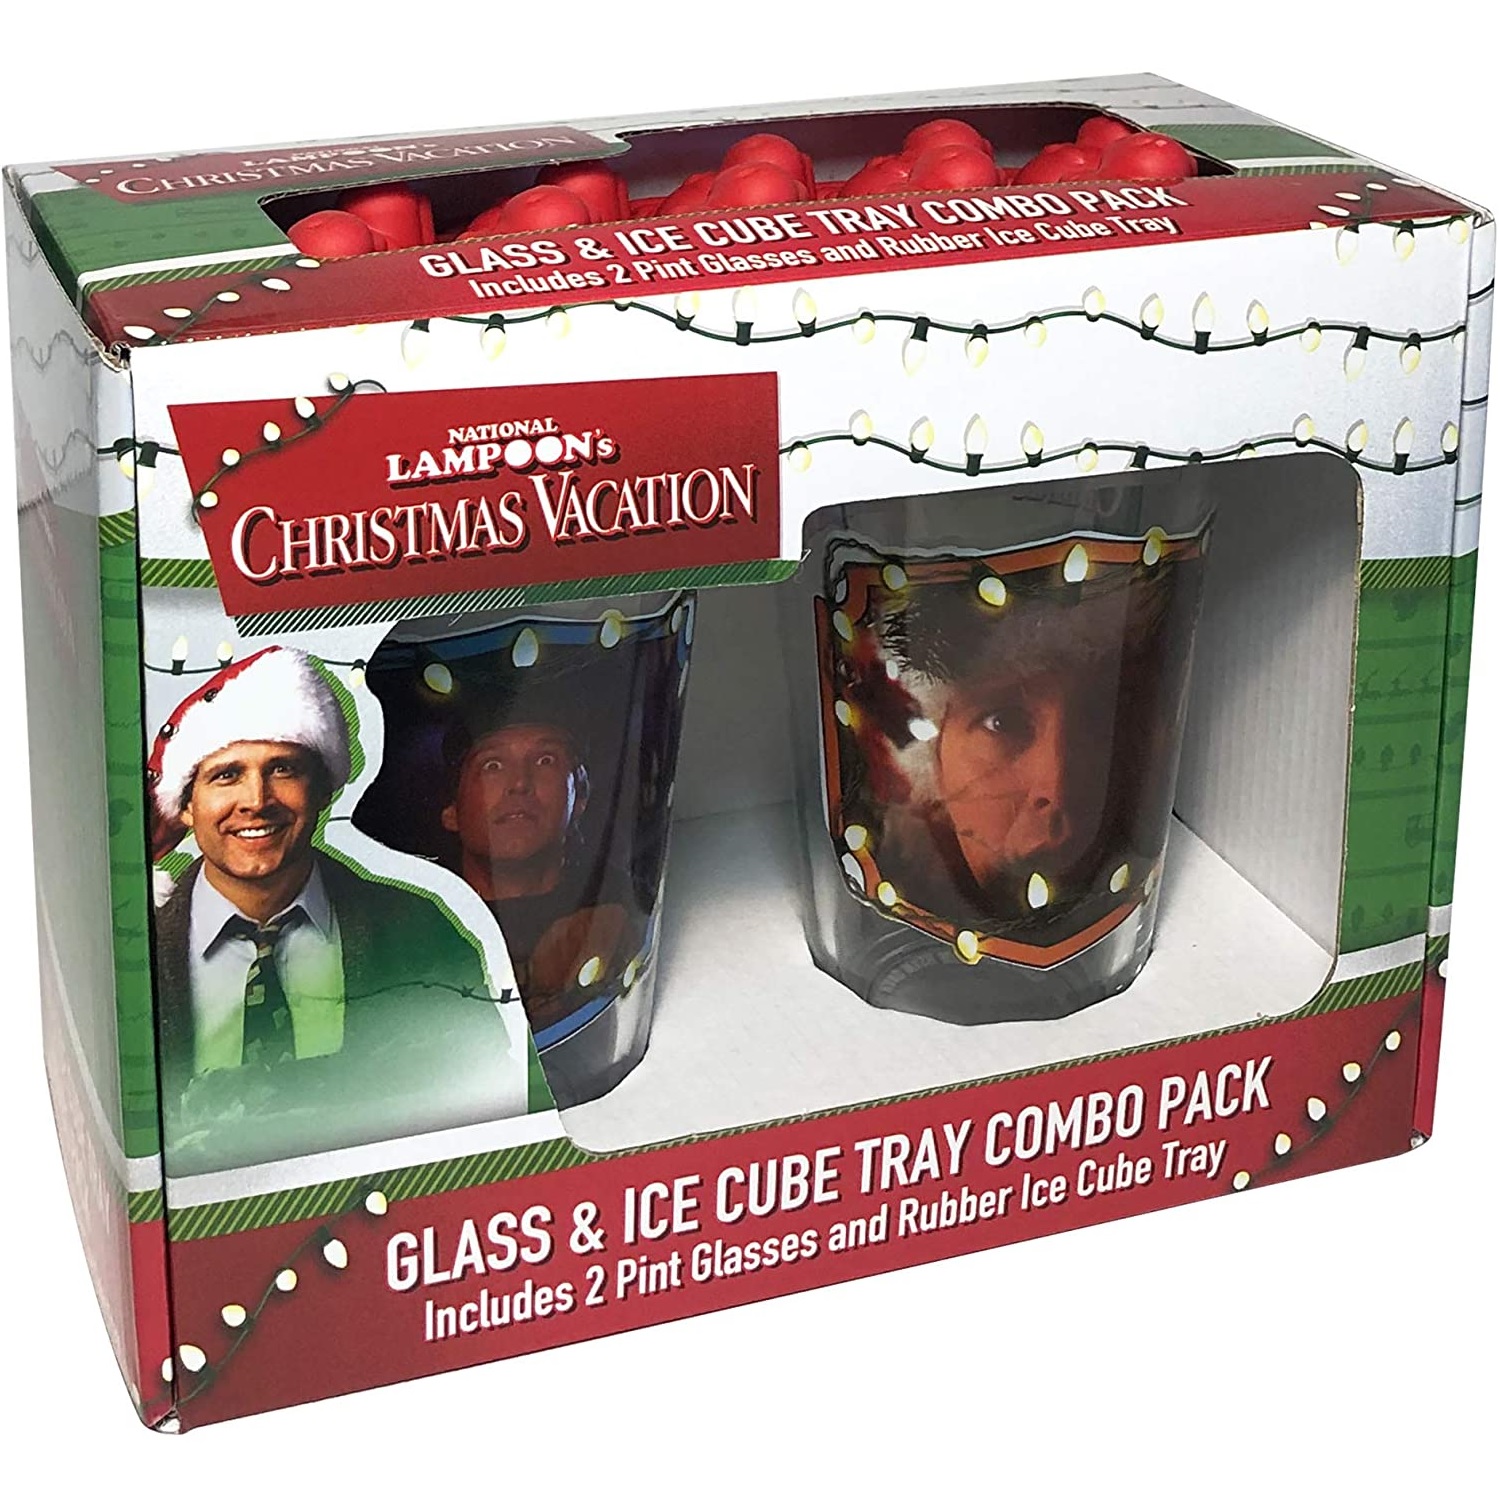 https://cdn11.bigcommerce.com/s-c9a80/images/stencil/original/products/3452/41139/Christmas_Vacation_Glass_and_Ice_Cube_Tray_Combo_Pack_Packaged_View_15528__52937.1636731374.jpg